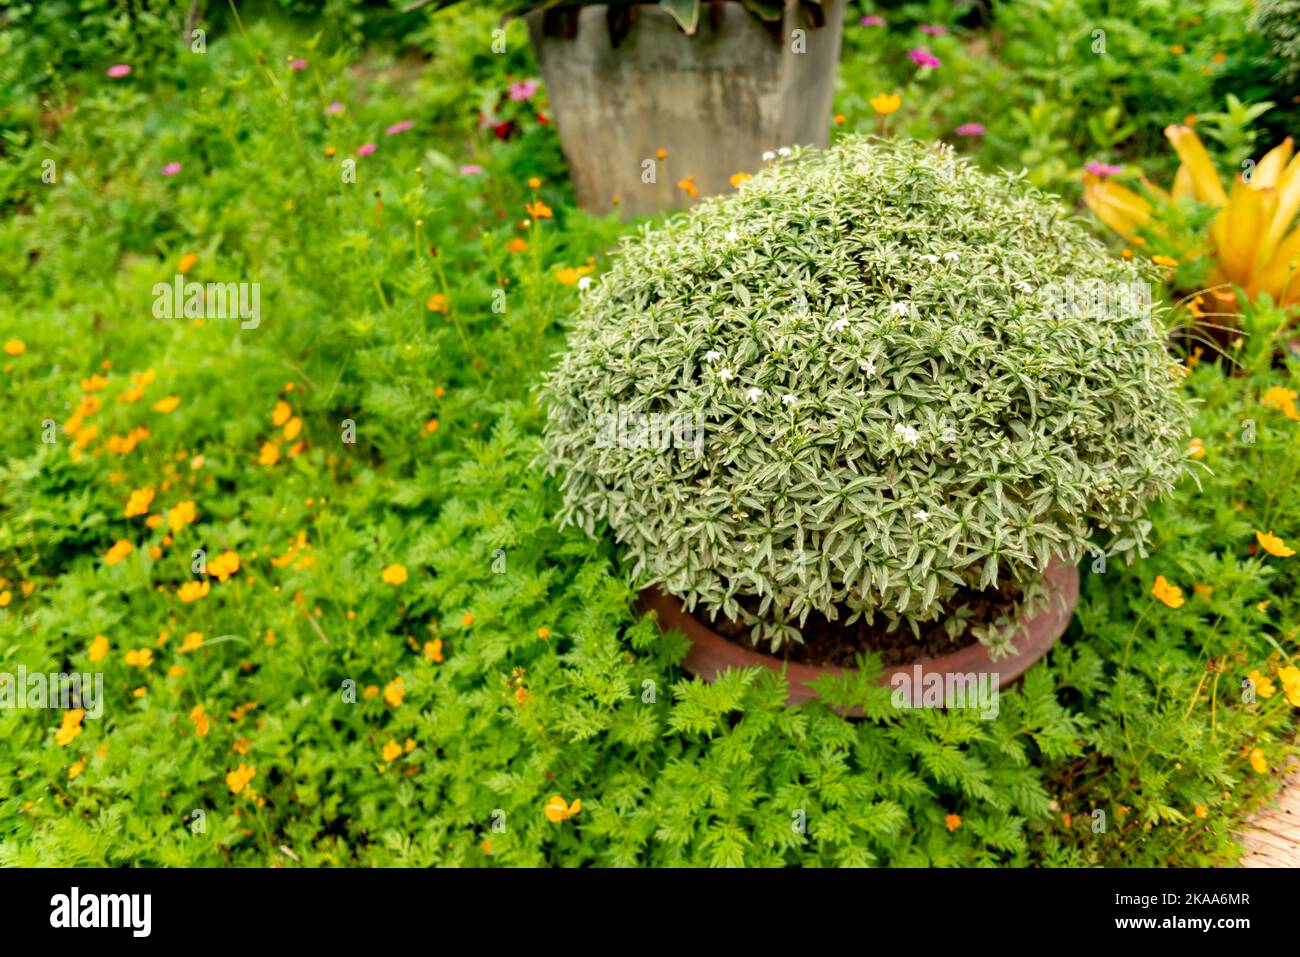 A Sedum (carpet) lineare plant in flowerpot in a park surrounded by flourishing plants Stock Photo